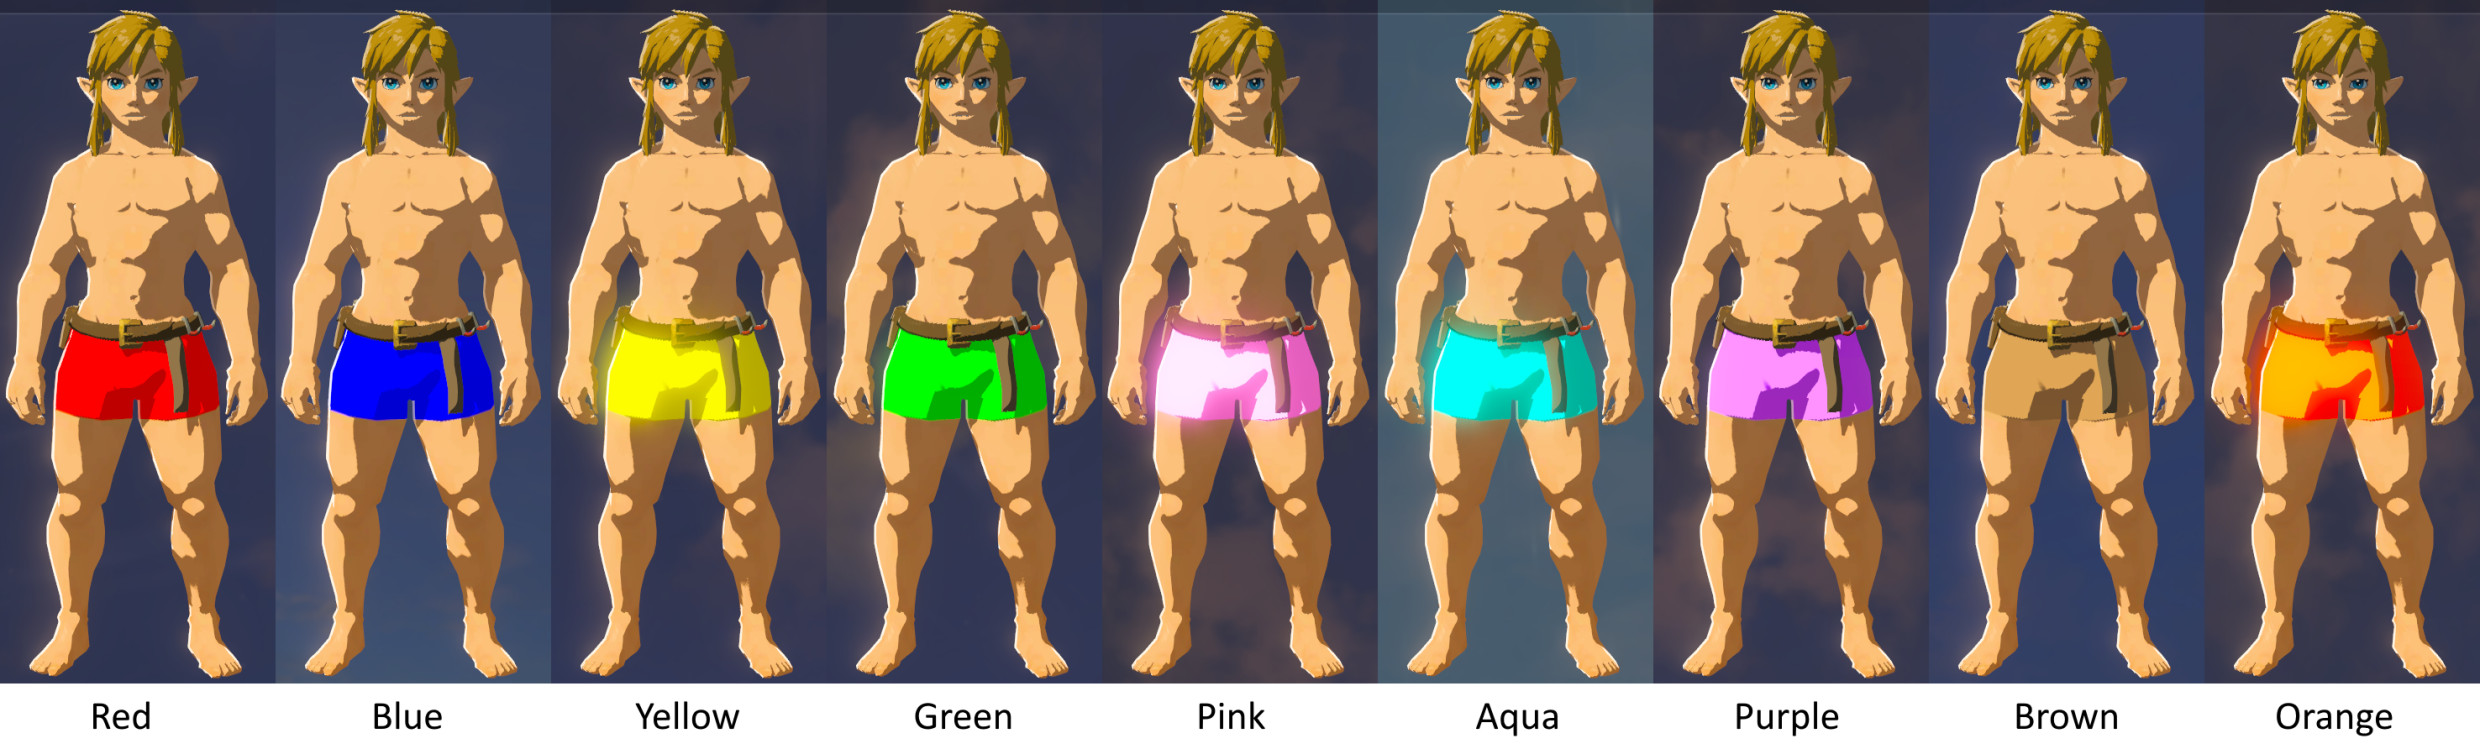 Untitled on Tumblr: In BotW, Link's underwear was supposed to be